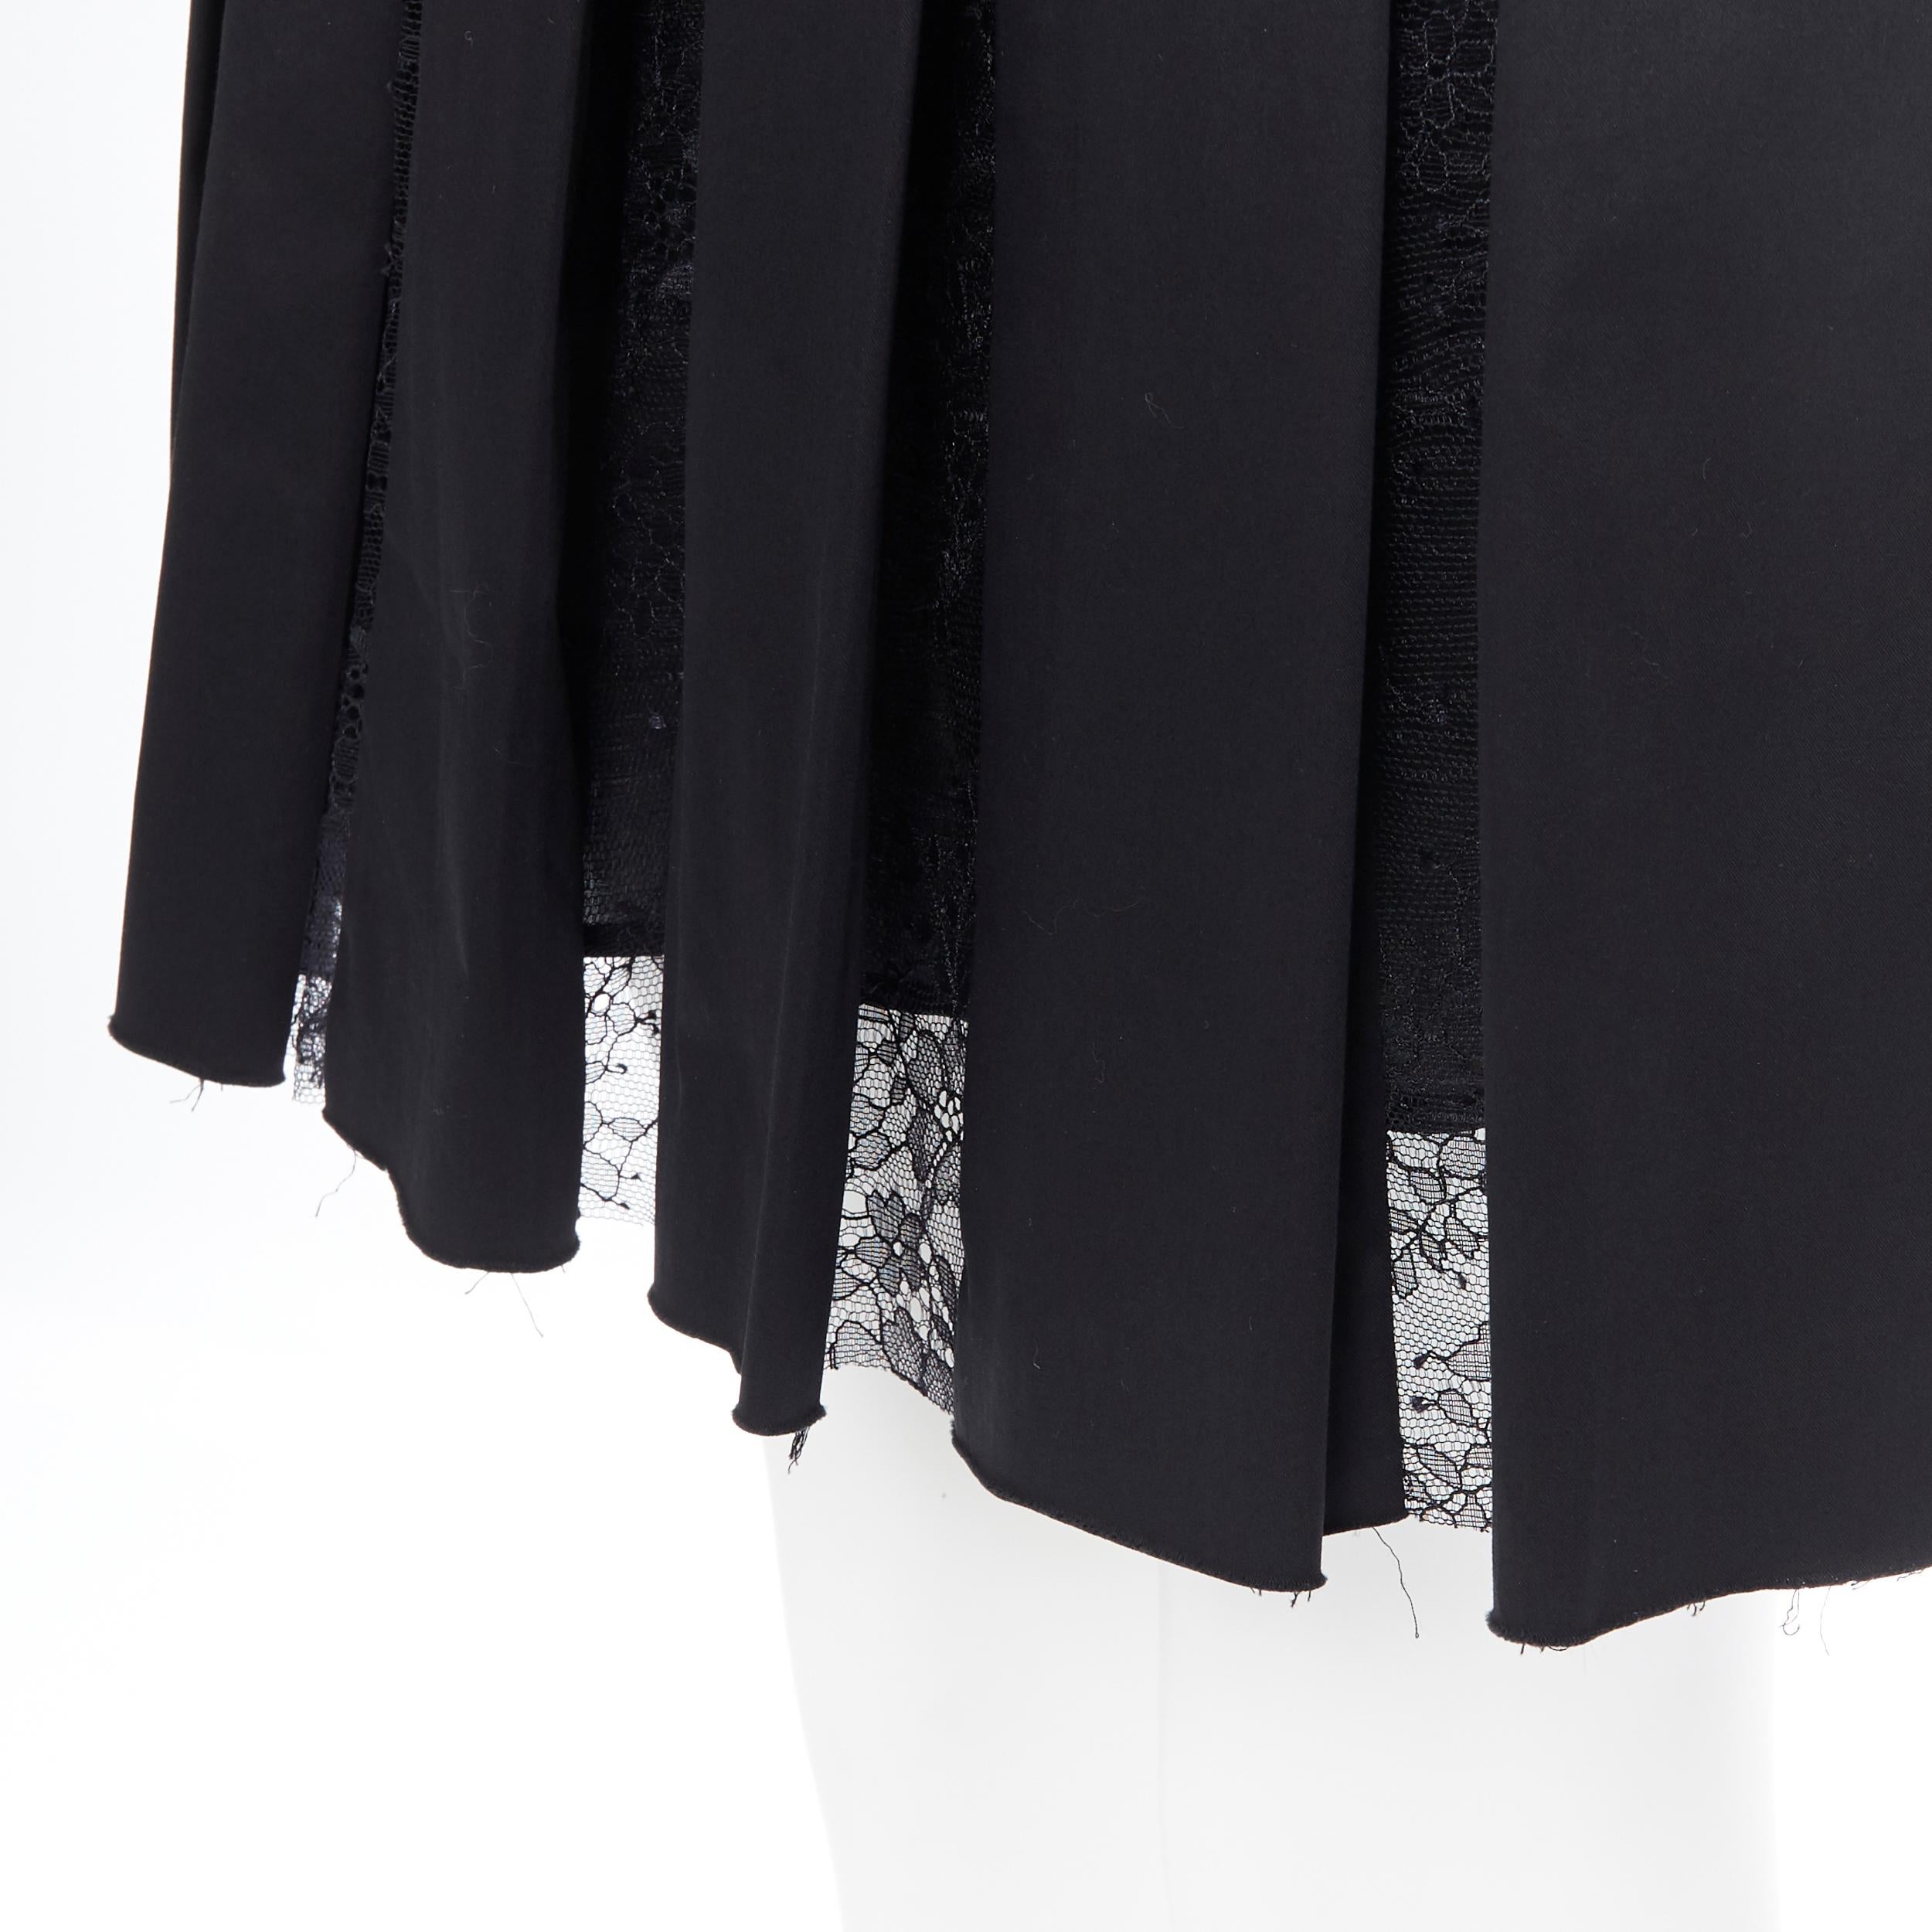 THAKOON black polyamide  floral sheer lace pleated lined flared mini skirt  US4
Brand: Thakoon
Model Name / Style: Pleated skirt
Material: Polyester
Color: Black
Pattern: Solid
Closure: Zip
Extra Detail: Raw cut hem.
Made in: Italy

CONDITION: